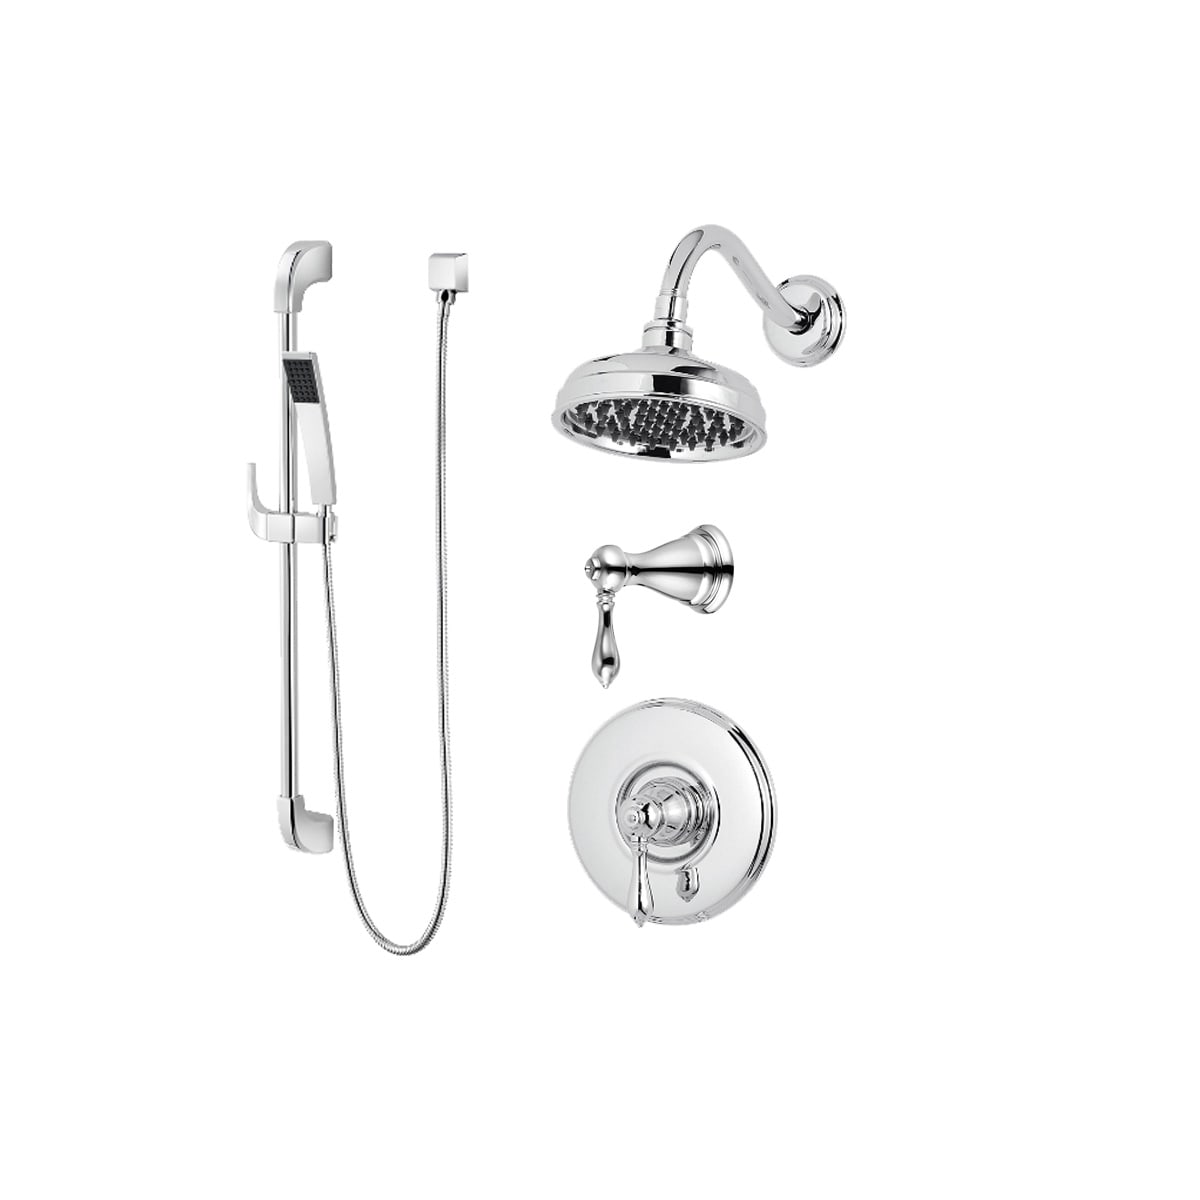 Pfister B89 7mbc Polished Chrome Marielle Shower System With Valve